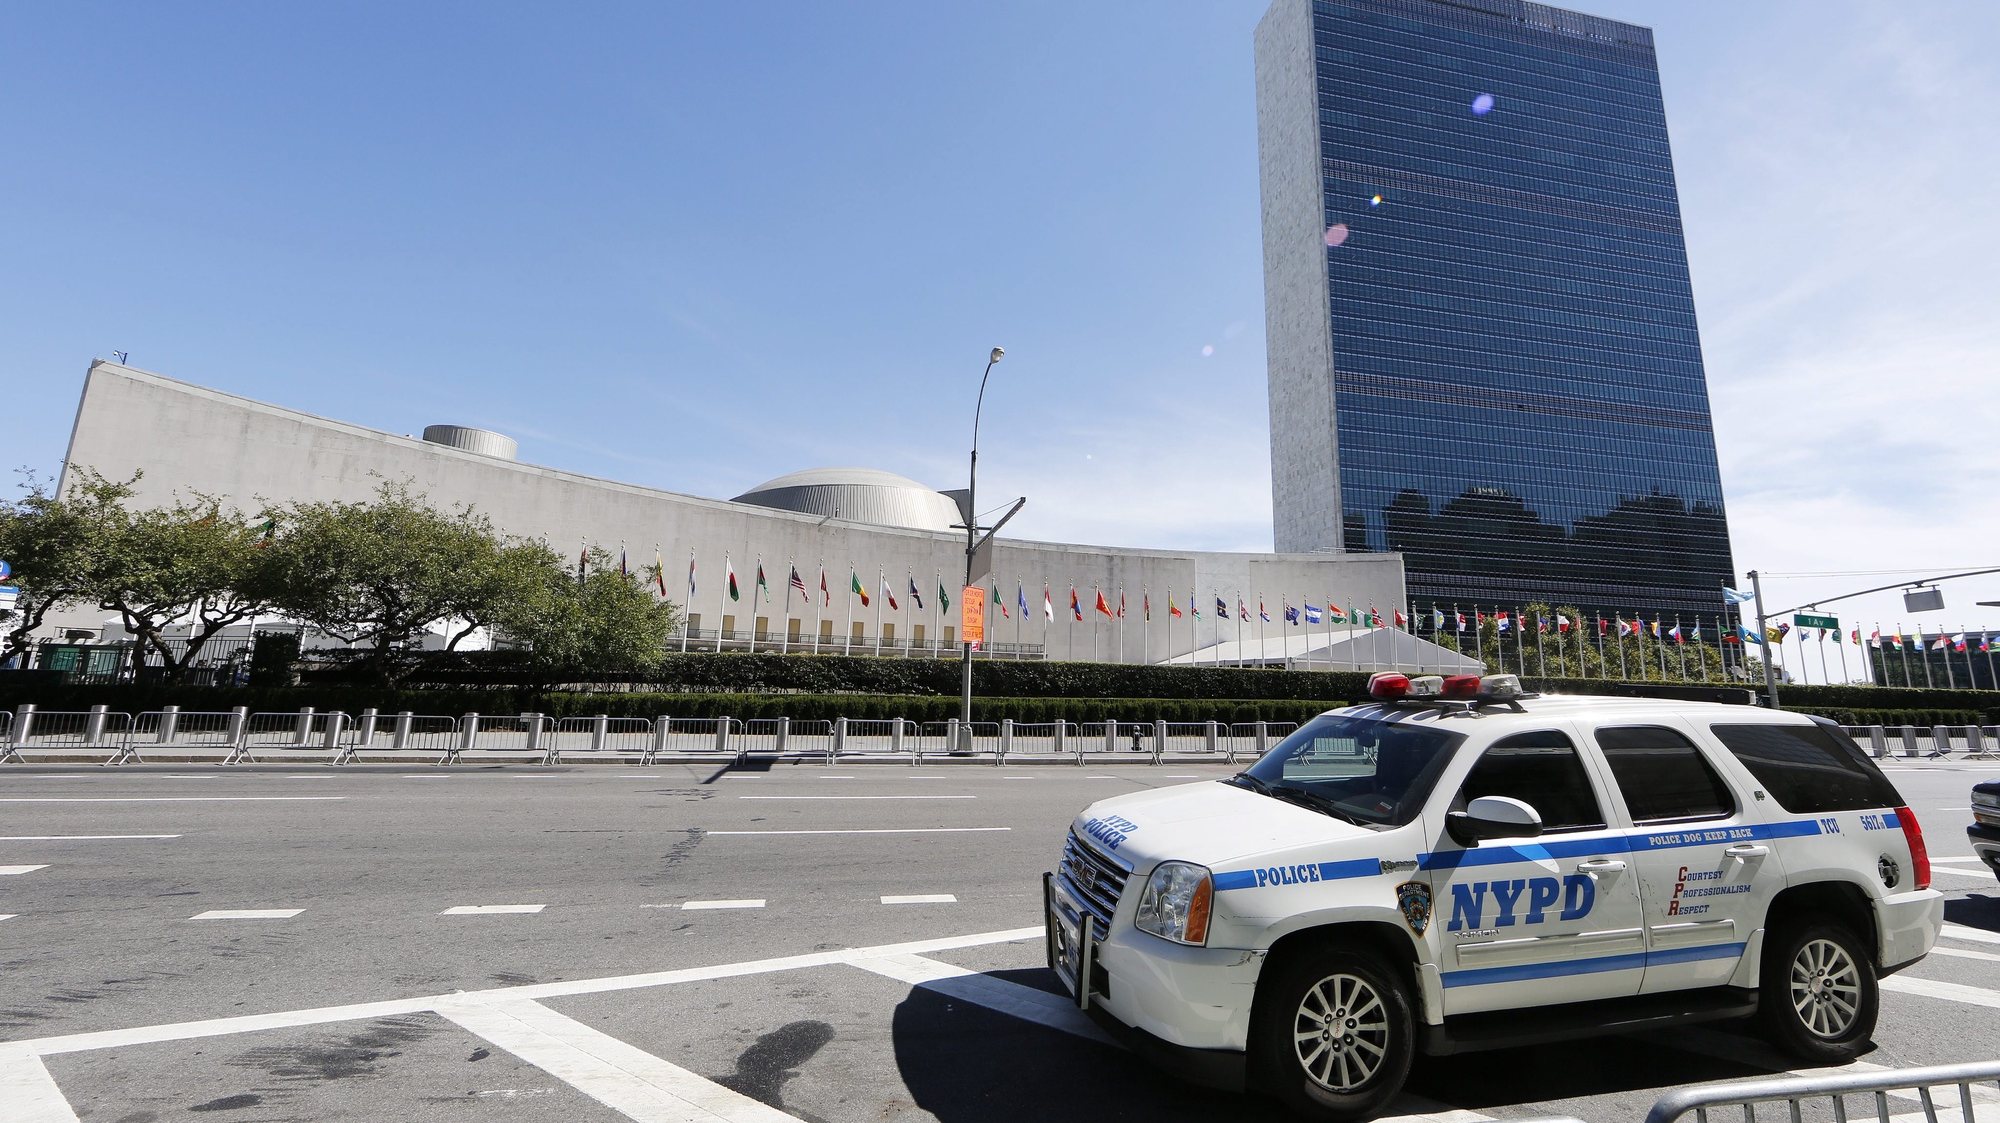 epa04947508 An NYPD vehicle sits in front of the United Nations General Assembly building (L) and the United Nations Secretariat Building (R) on a closed First Avenue outside United Nations Headquarters in New York City, New York, USA, 24 September 2015. Pope Francis will address the UN General Assembly 25 September and the UN Development Summit and General Assembly will take place from 25 September through 03 October with more than 150 heads of state in attendance.  EPA/MATT CAMPBELL